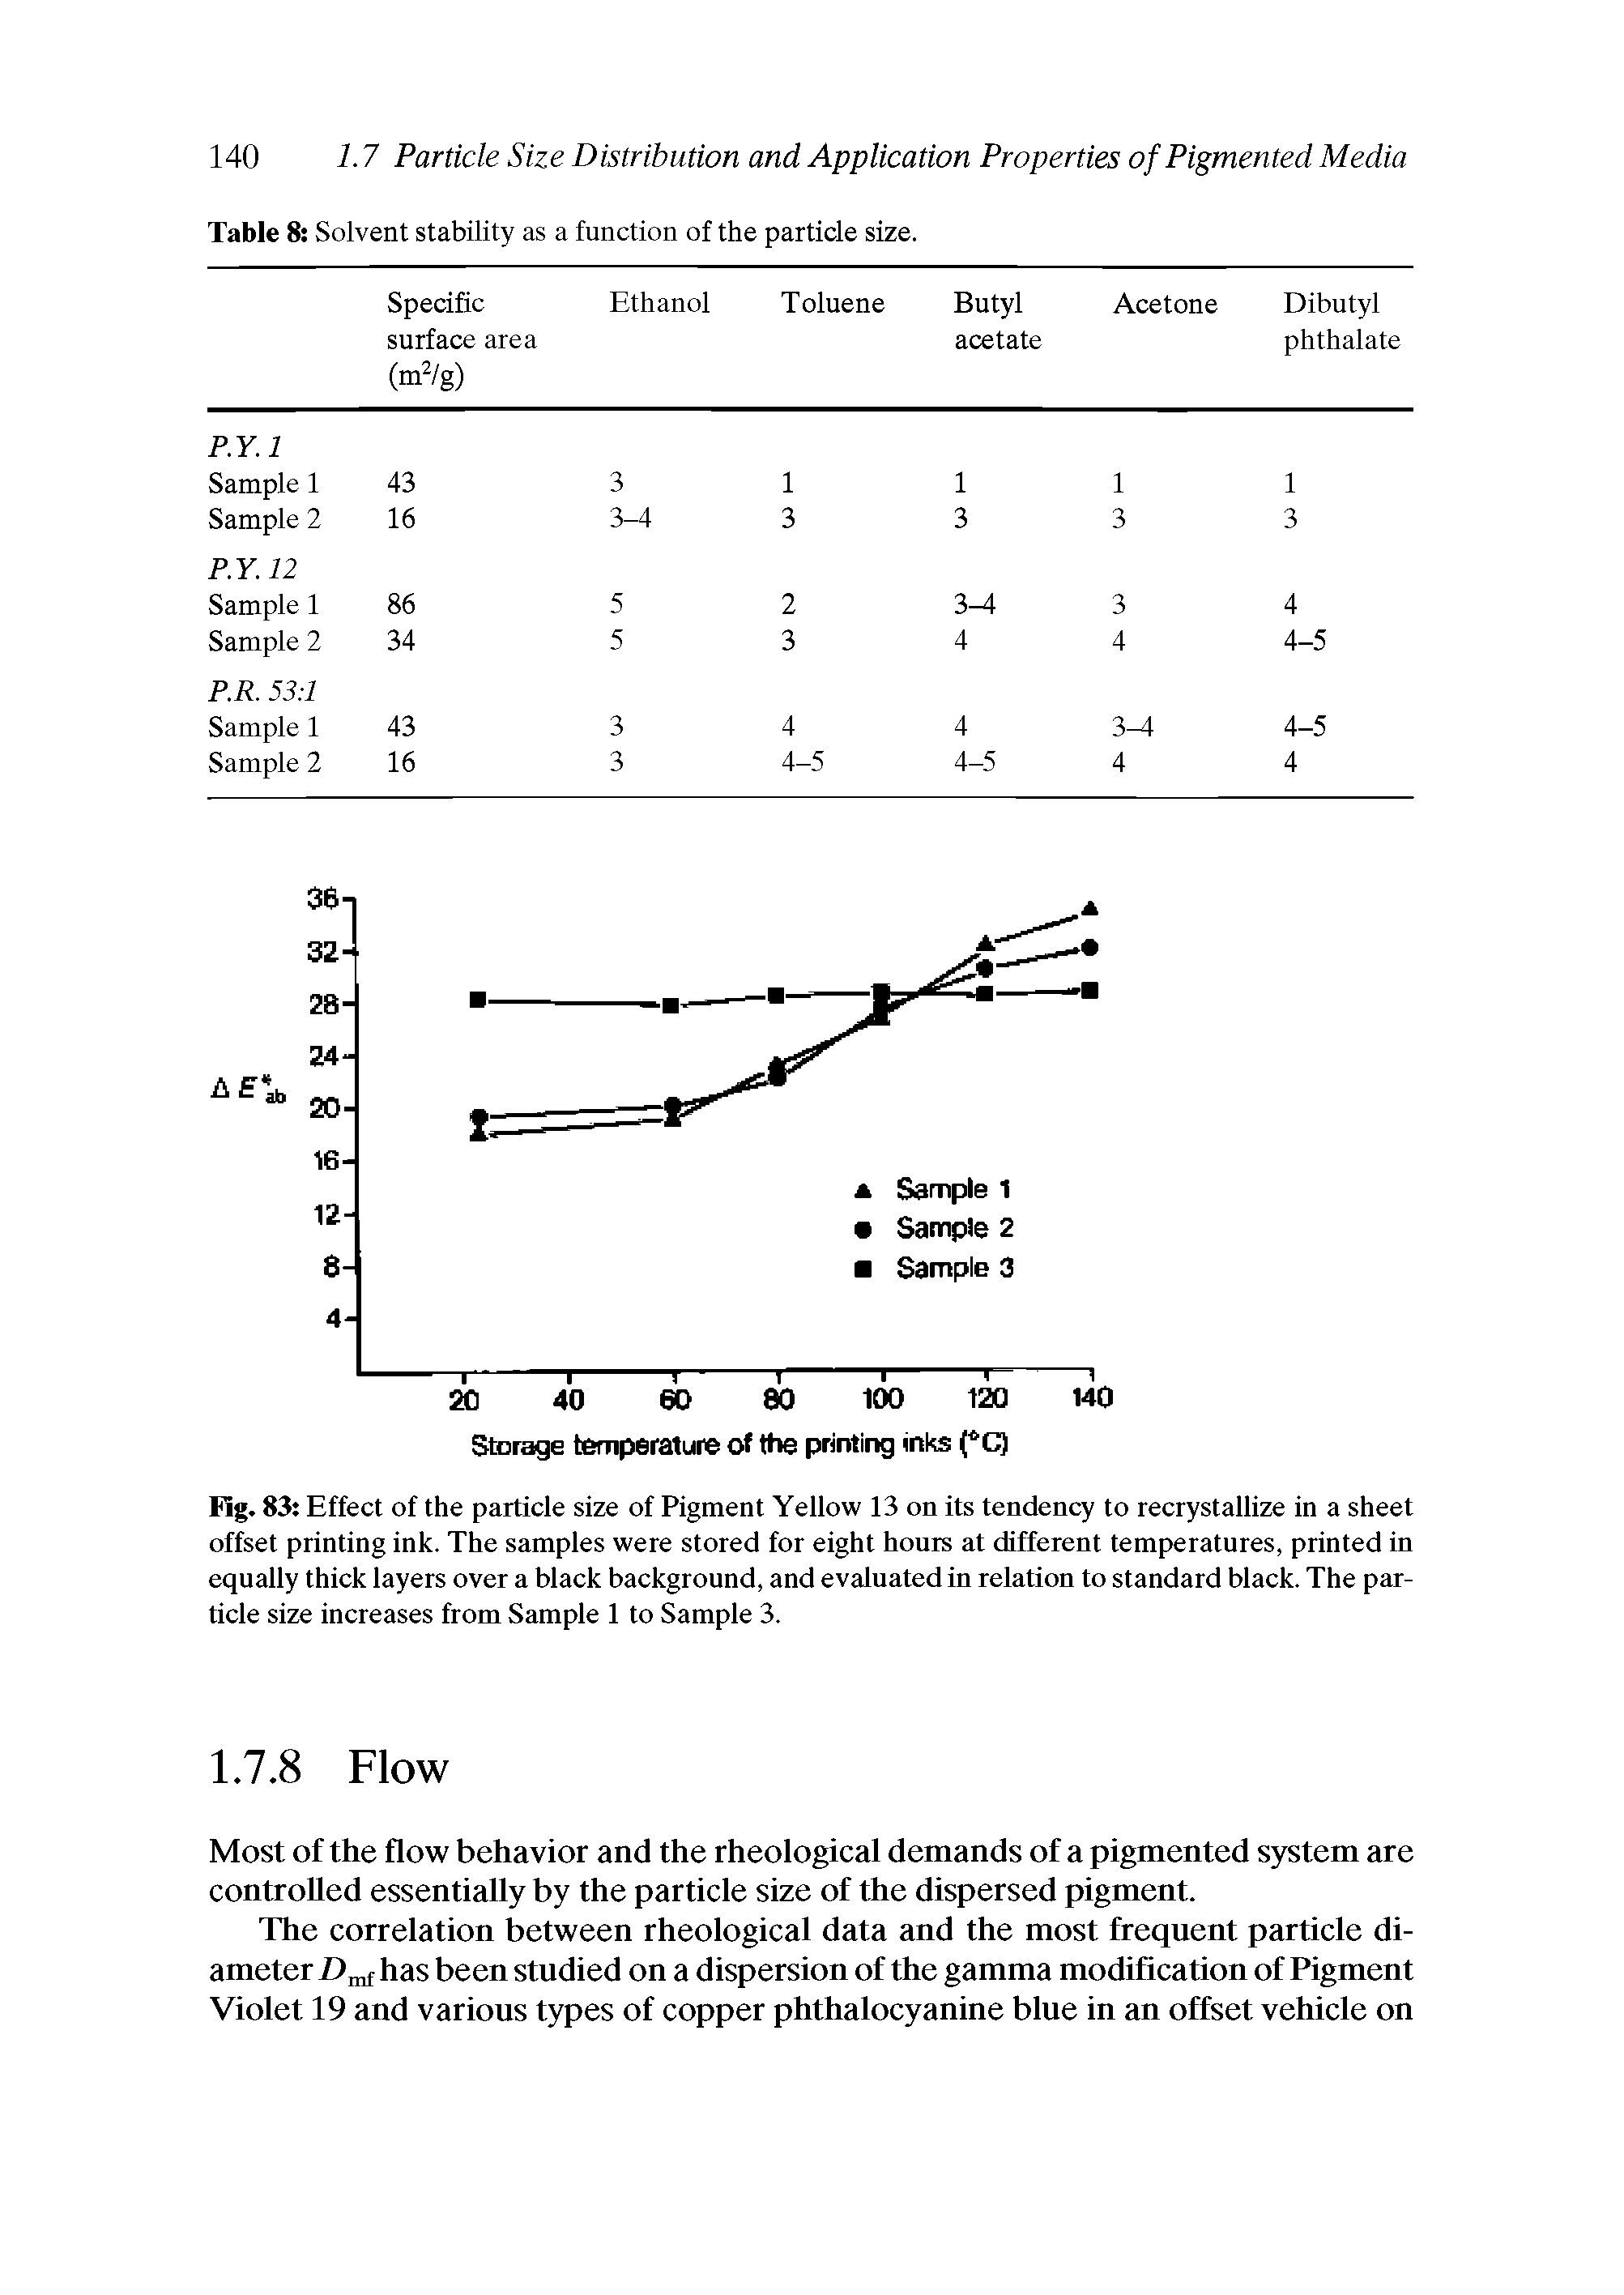 Fig. 83 Effect of the particle size of Pigment Yellow 13 on its tendency to recrystallize in a sheet offset printing ink. The samples were stored for eight hours at different temperatures, printed in equally thick layers over a black background, and evaluated in relation to standard black. The particle size increases from Sample 1 to Sample 3.